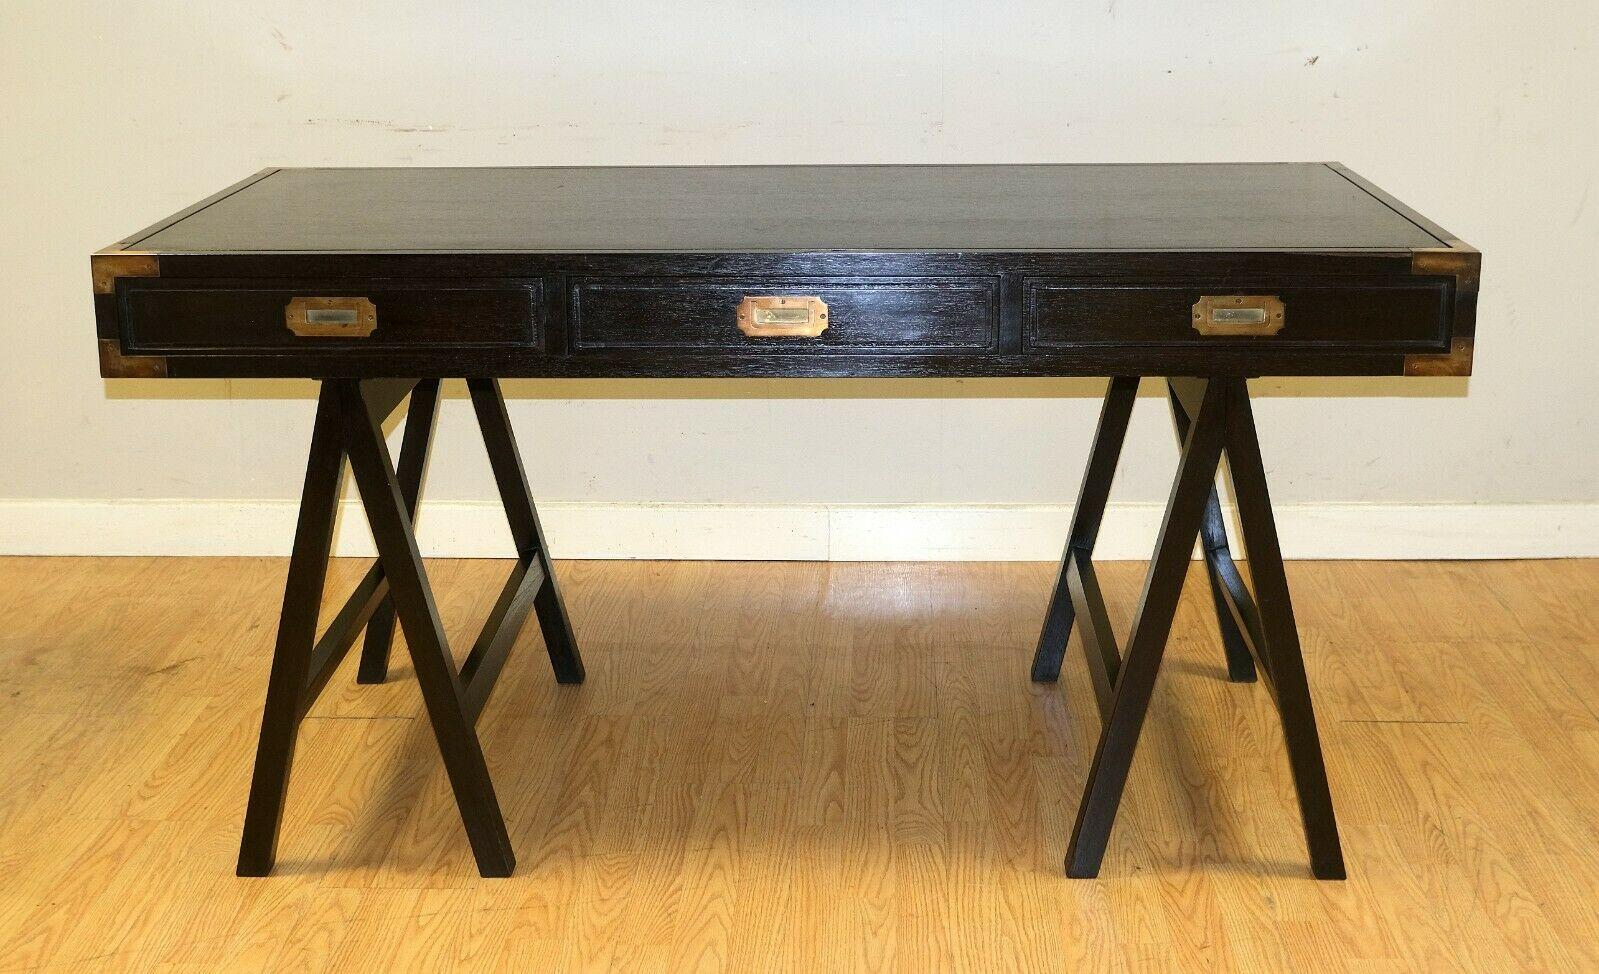 We are delighted to offer for sale this gorgeous Military Campaign Trestle mahogany brown desk with three drawers.

This well made, solid, and good-looking desk offers style with a lovely rich brown colour. It has three good size drawers with